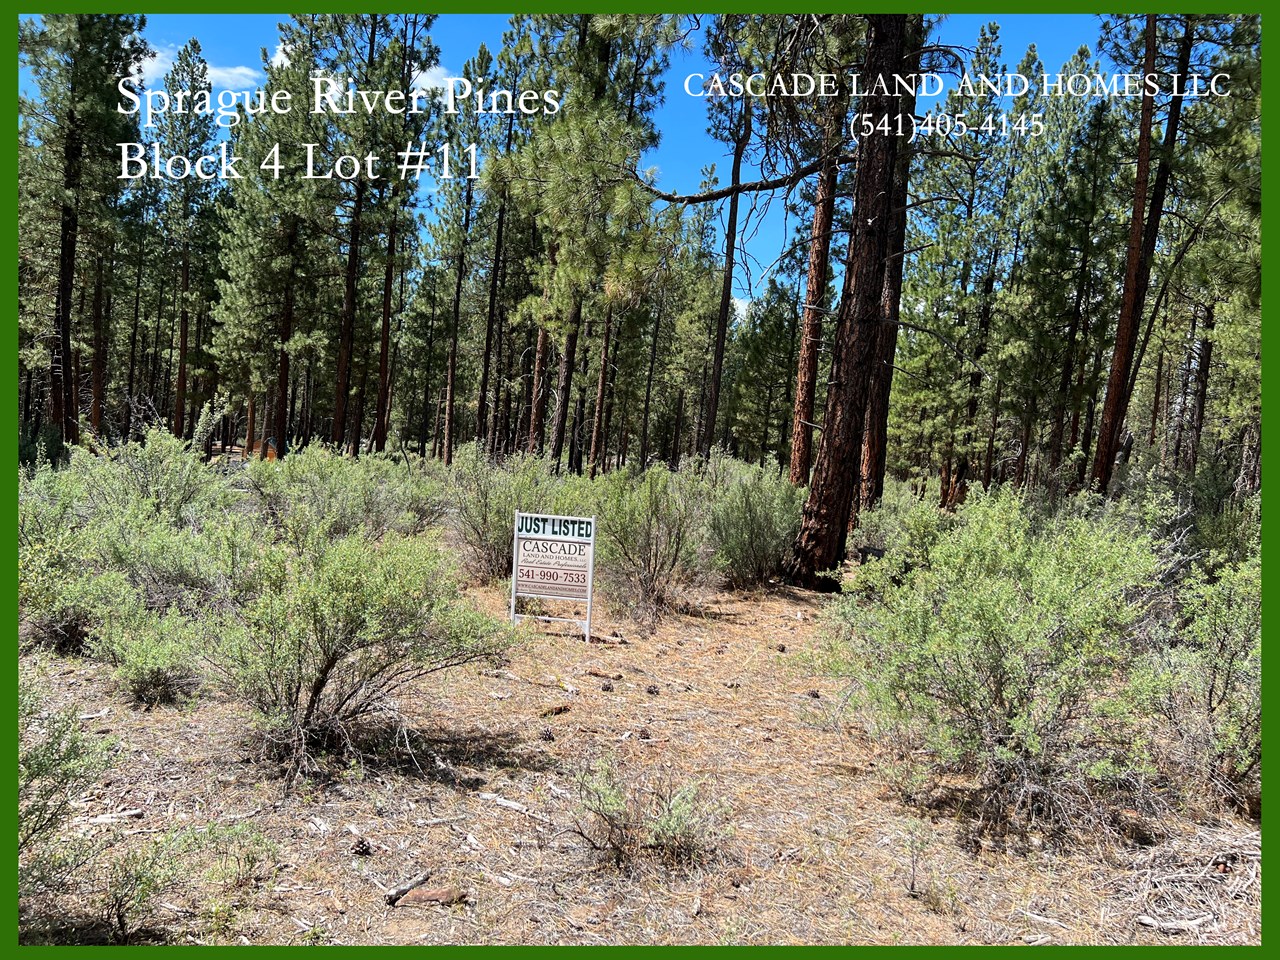 tall pine trees give this property the feeling of being deep in the forest, and they offer a tremendous amount of privacy. the property is also covered in some low shrubs, mainly rabbit brush and sage, and a few native types of grass. in the springtime, there are wildflowers everywhere!